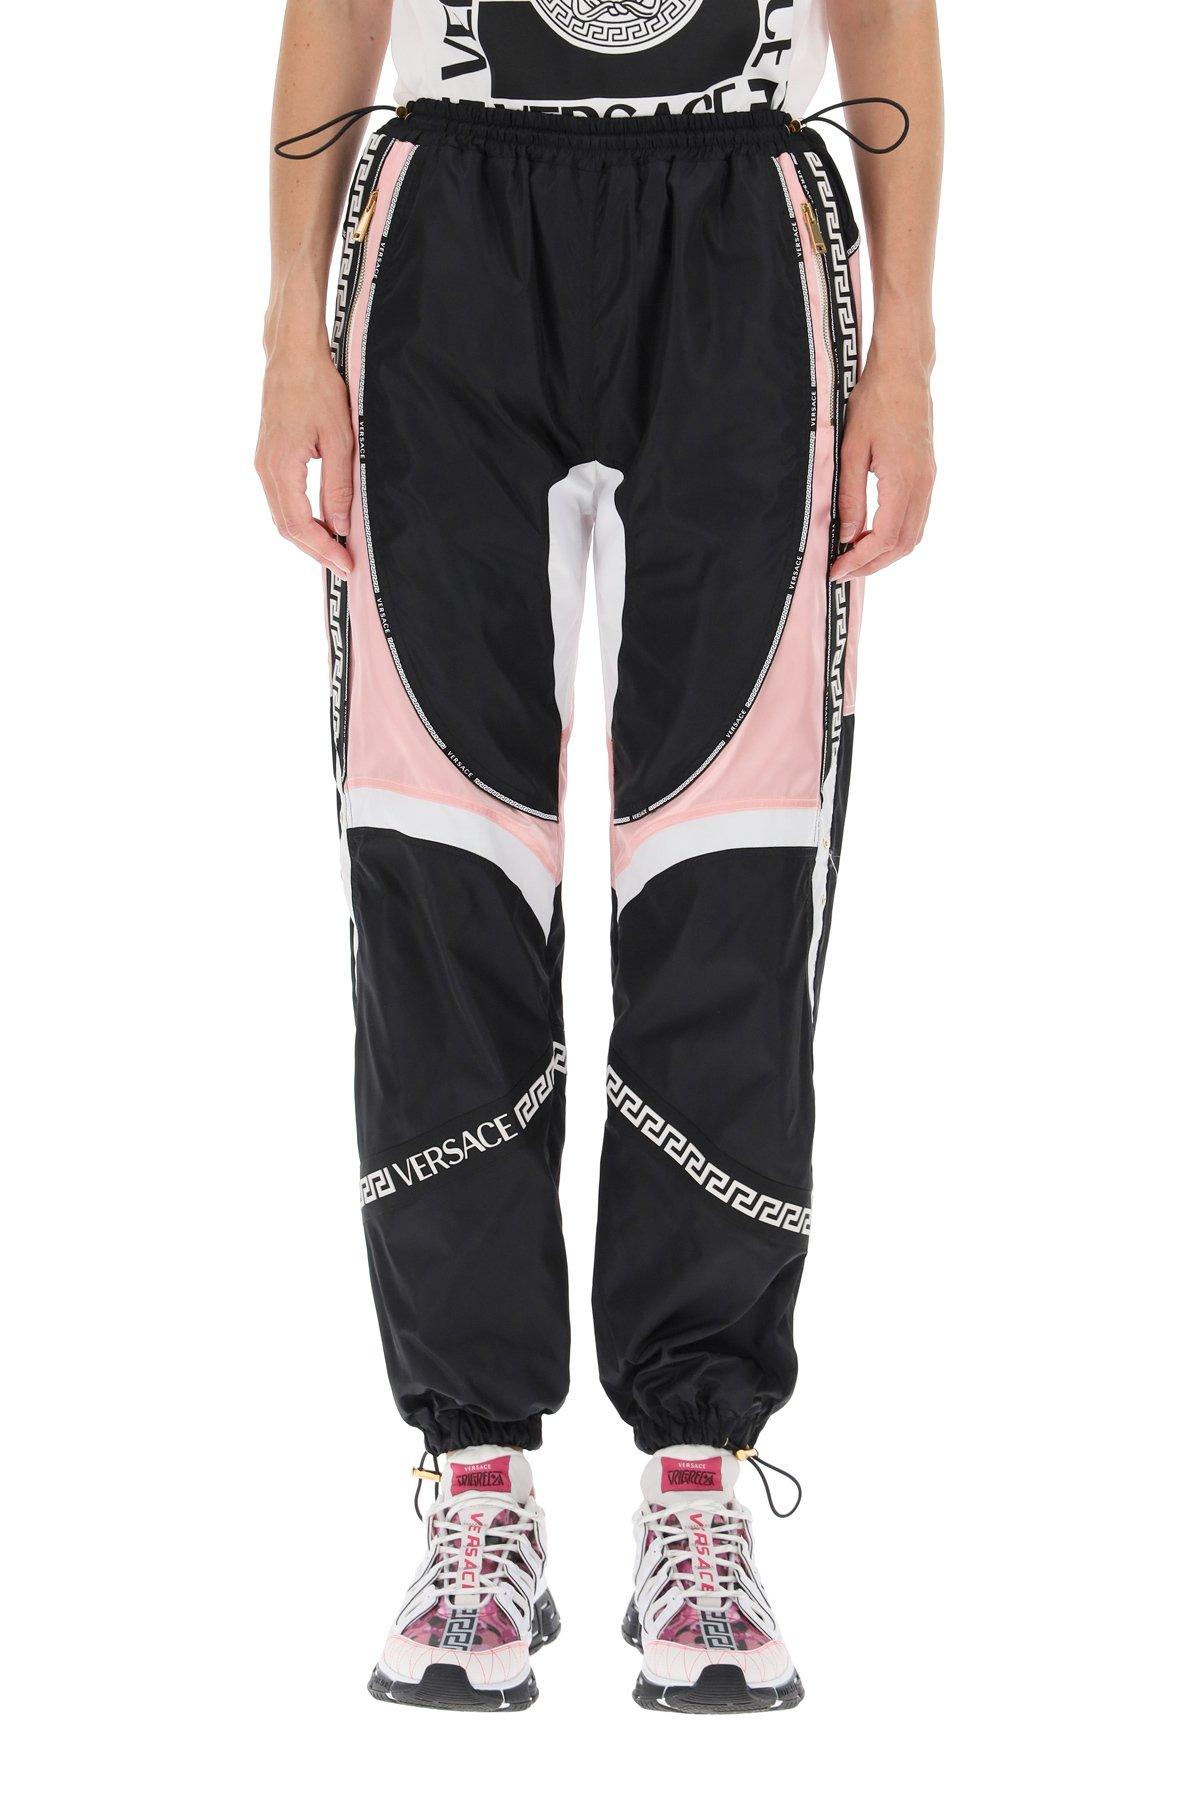 Versace Satin And Nylon jogger Pants in Black,Pink (Black) | Lyst